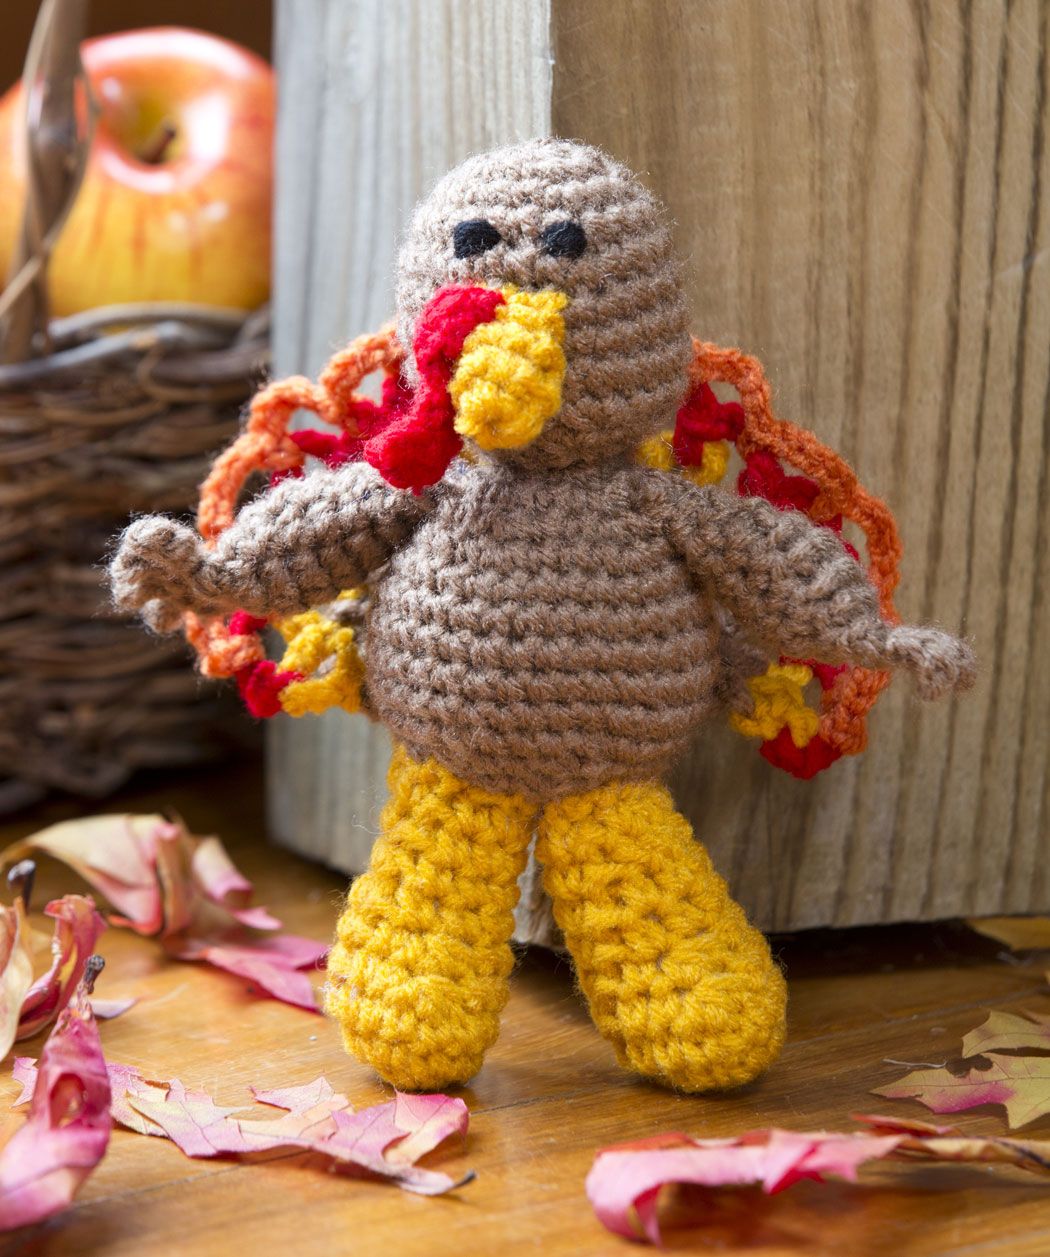 Tom Turkey Crochet Pattern  #redheartyarn   Made several of these for Tday so fa